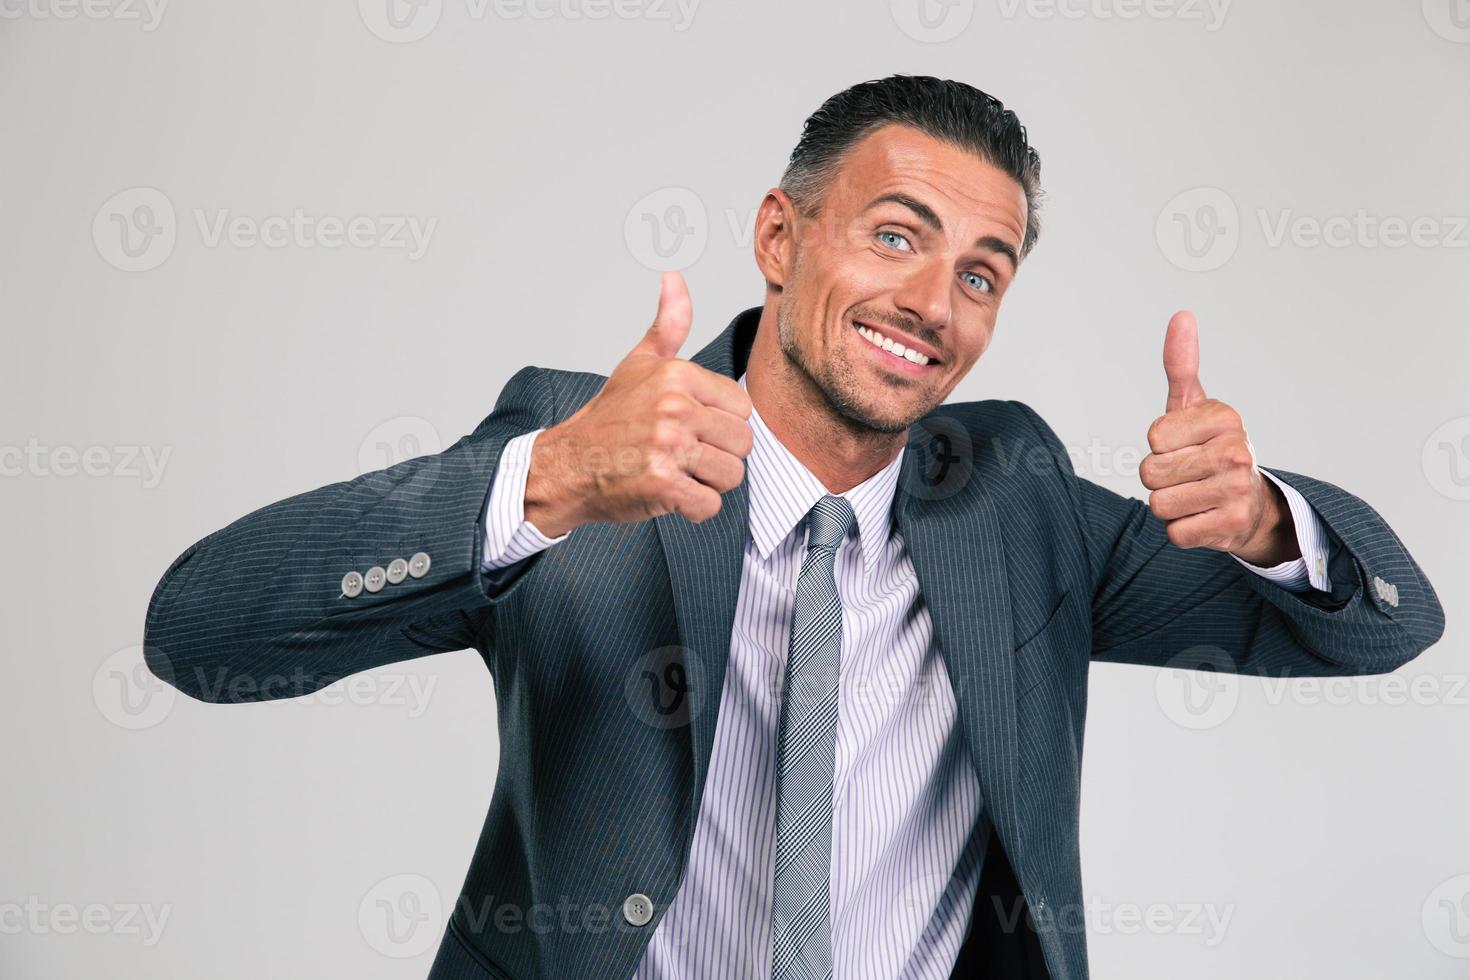 Funny man showing thumbs up photo